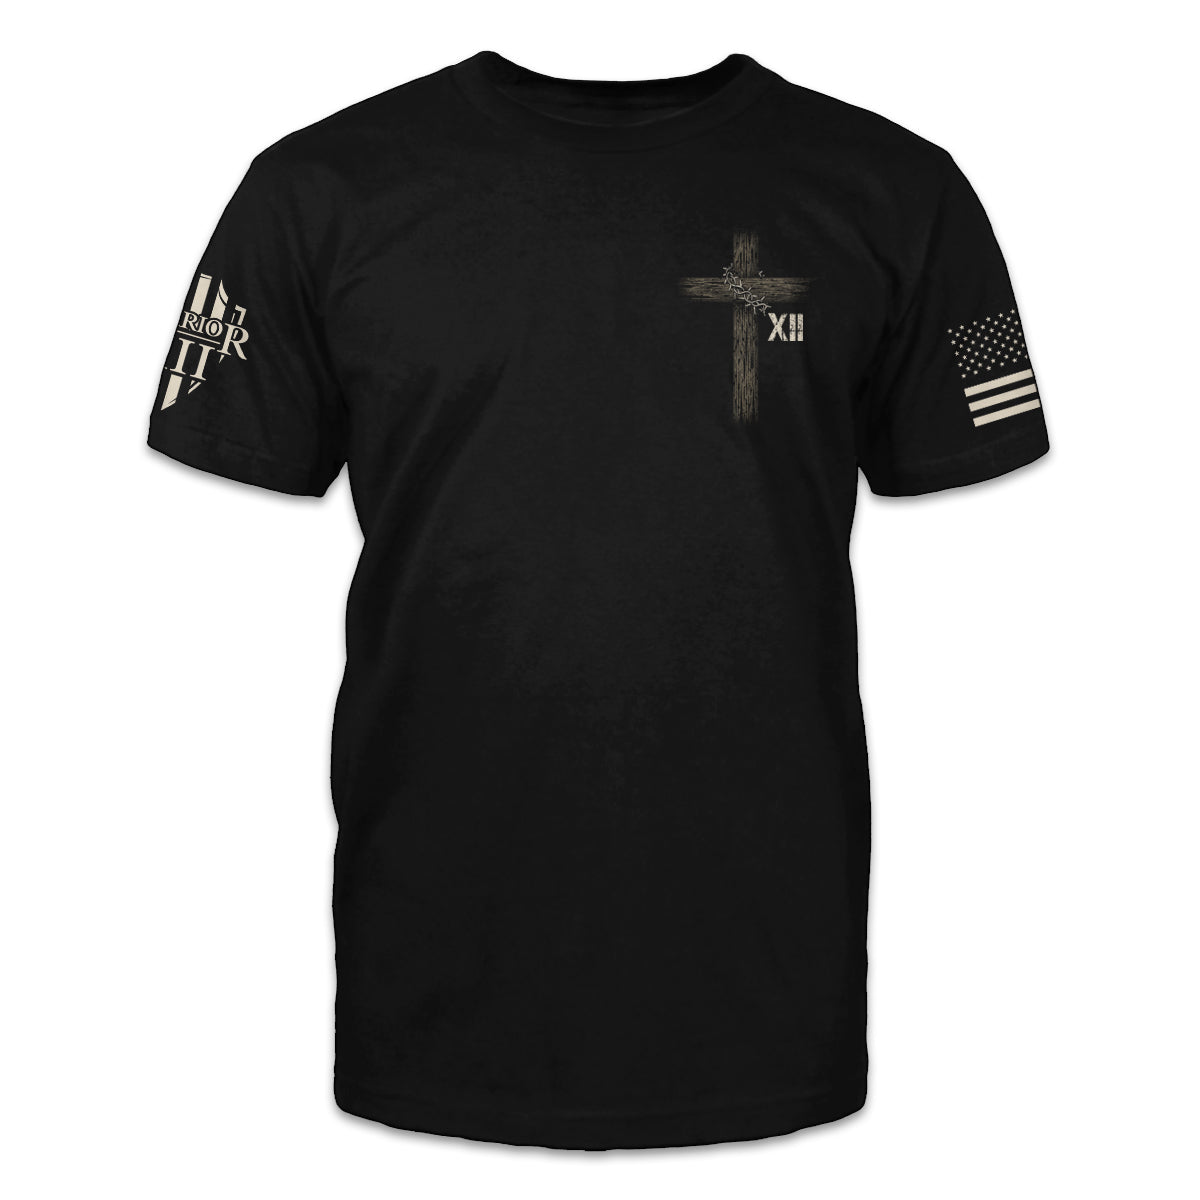 The front of a black t-shirt showing a small pocket image of a cross with a crown of thorns